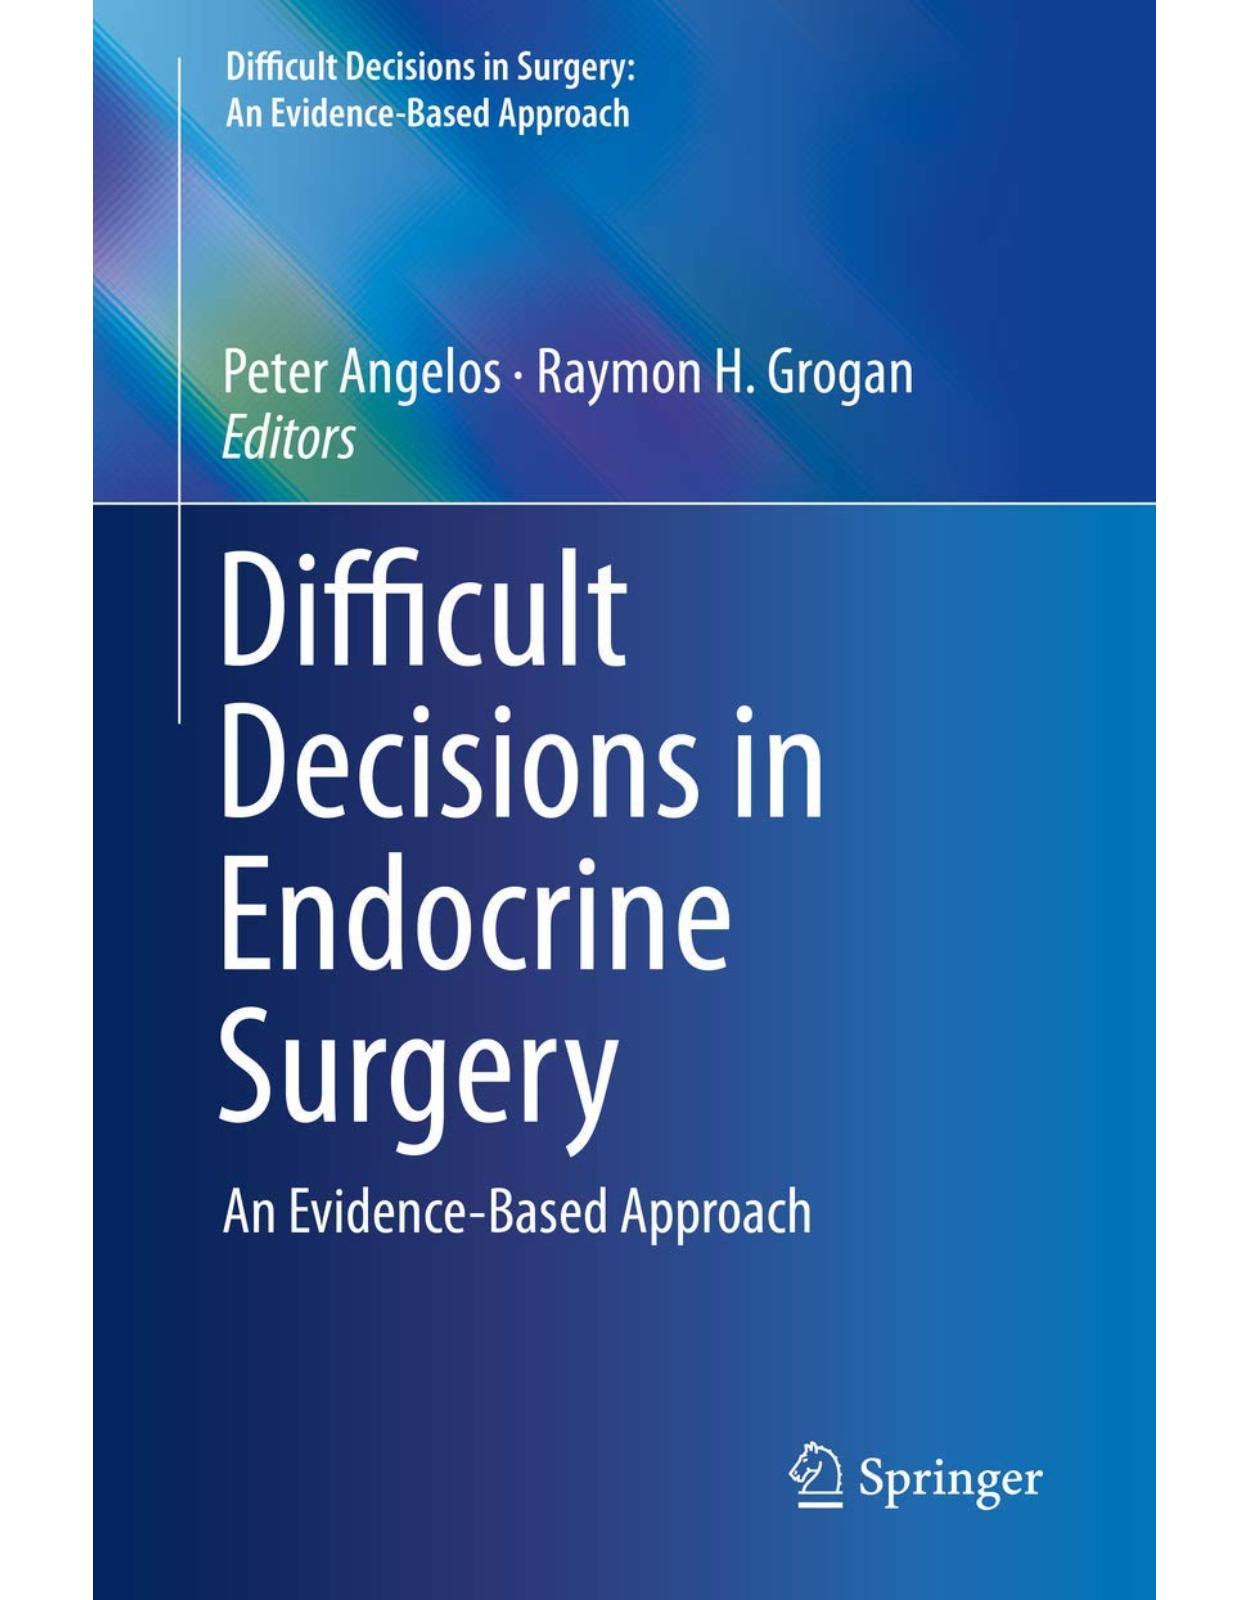 Difficult Decisions in Endocrine Surgery: An Evidence-Based Approach (Difficult Decisions in Surgery: An Evidence-Based Approach)